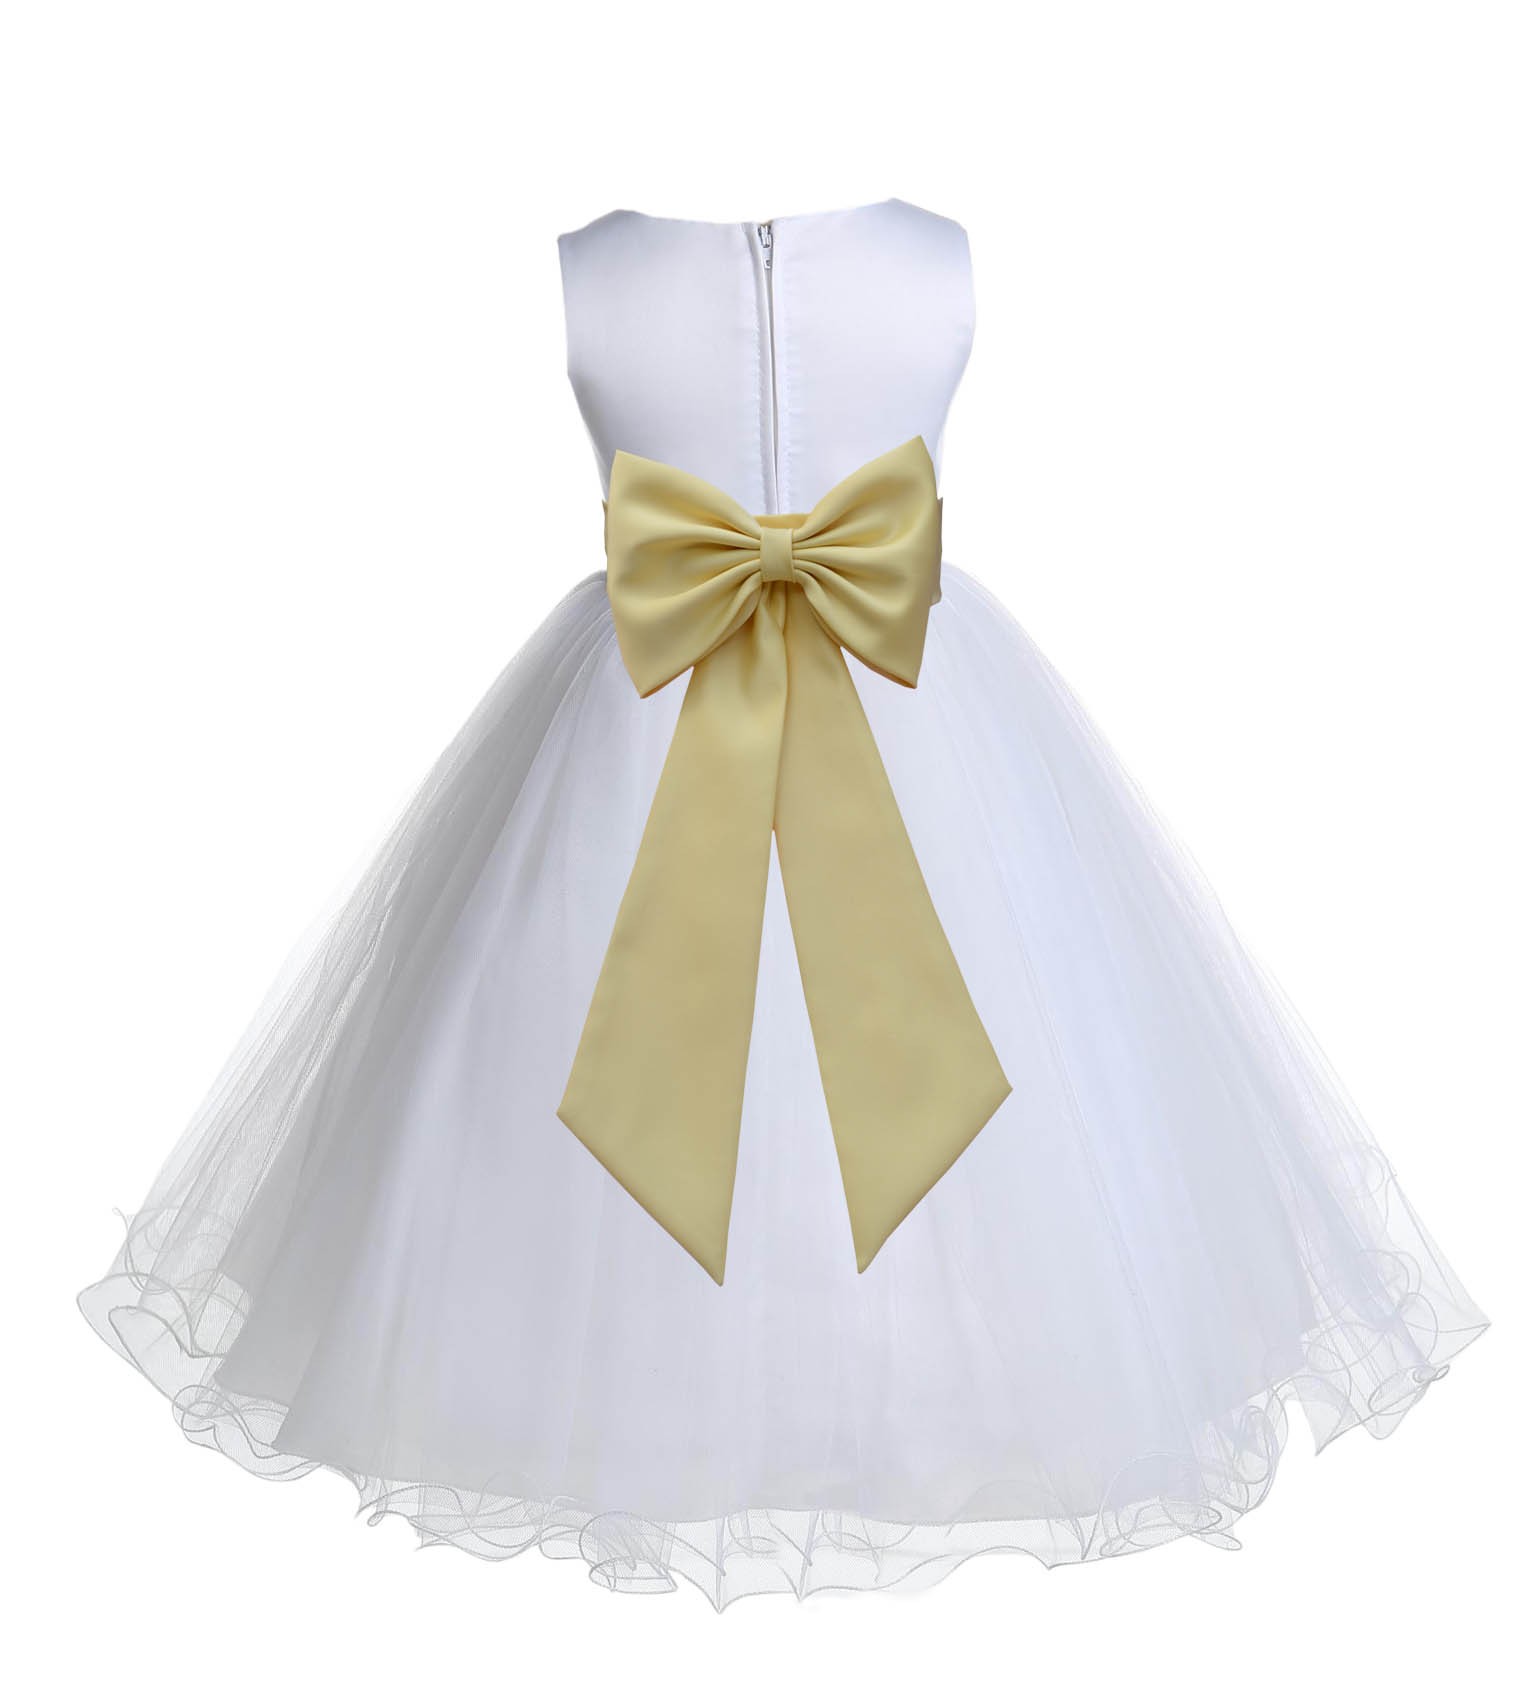 White/Canary Tulle Rattail Edge Flower Girl Dress Wedding Bridesmaid 829T